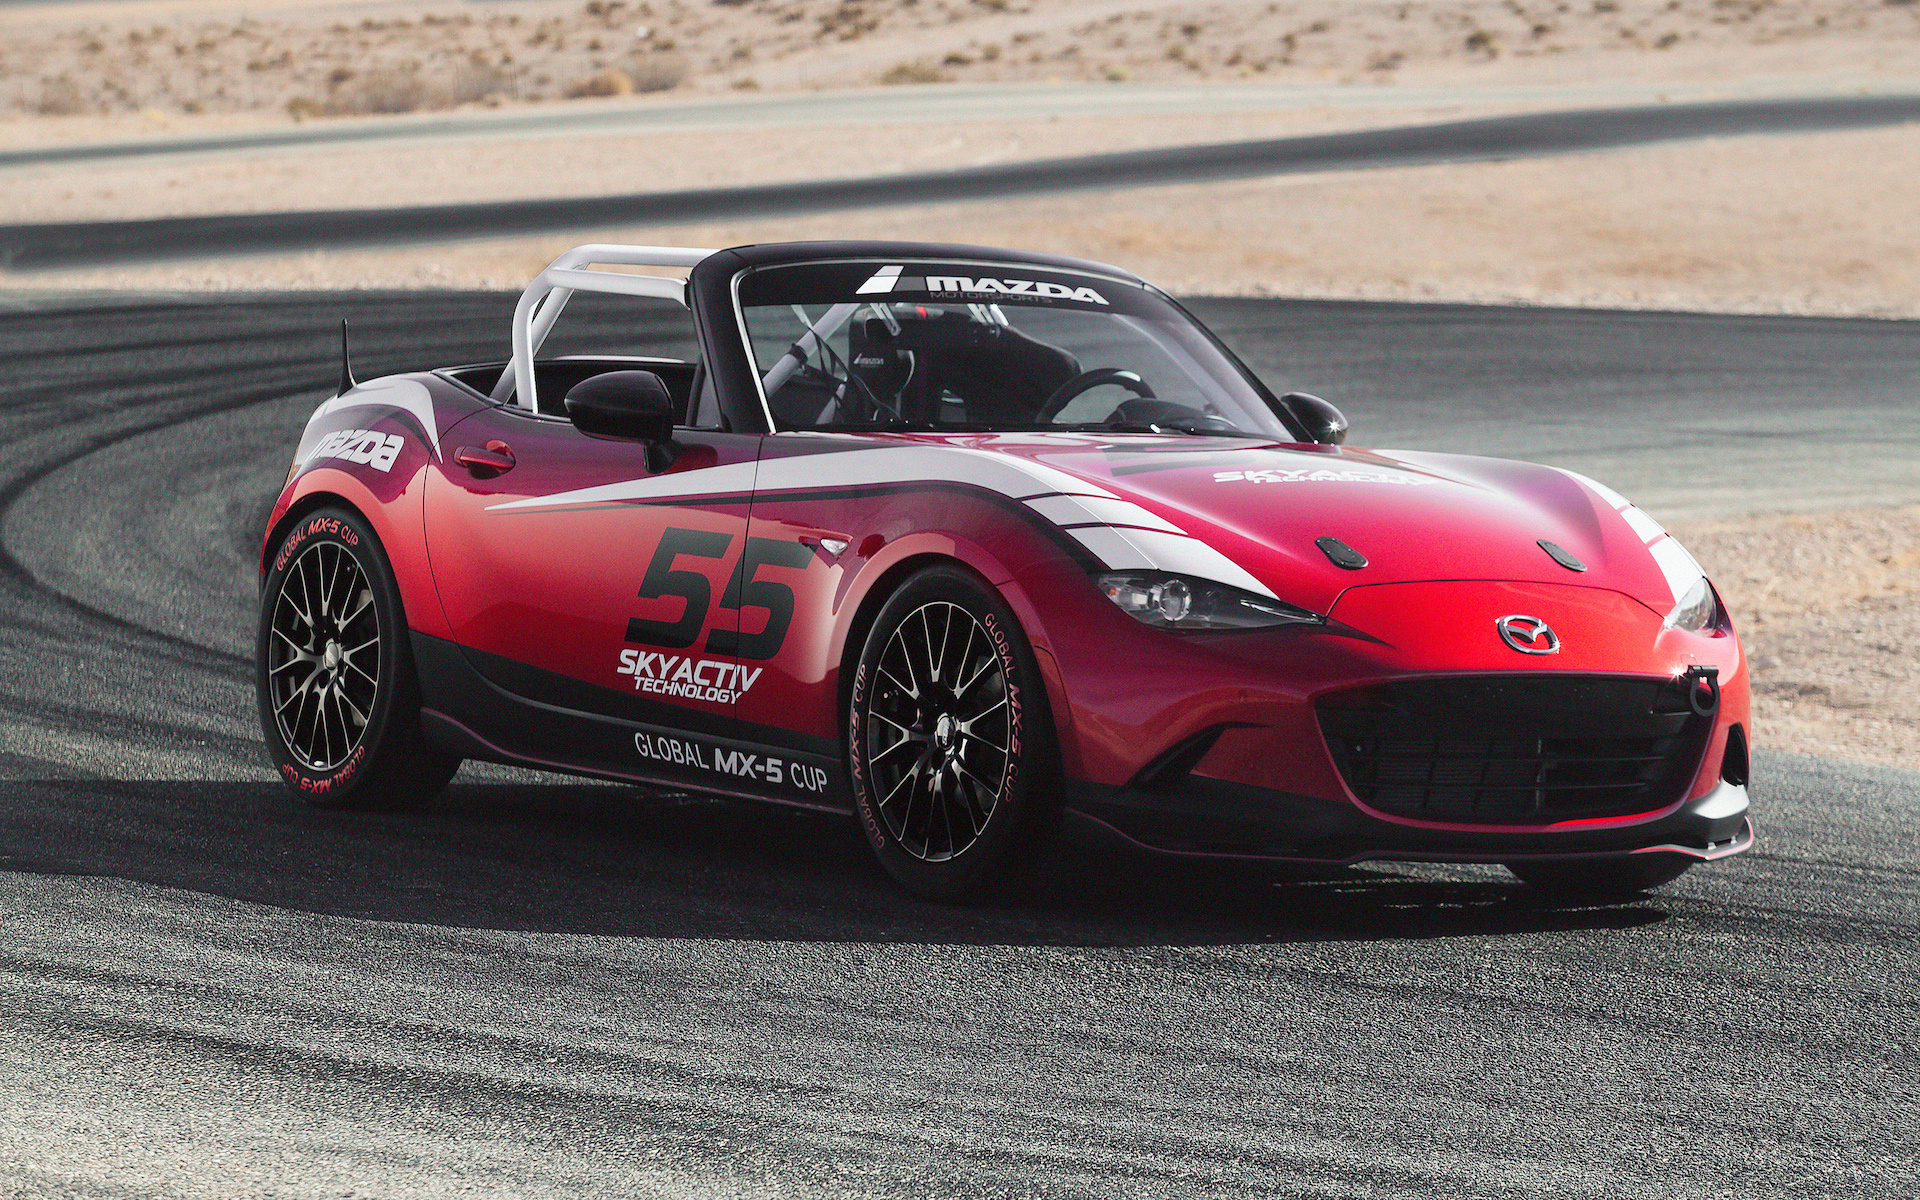 Mazda MX-5, Stunning wallpapers, Shared by enthusiasts, Car enthusiasts' delight, 1920x1200 HD Desktop